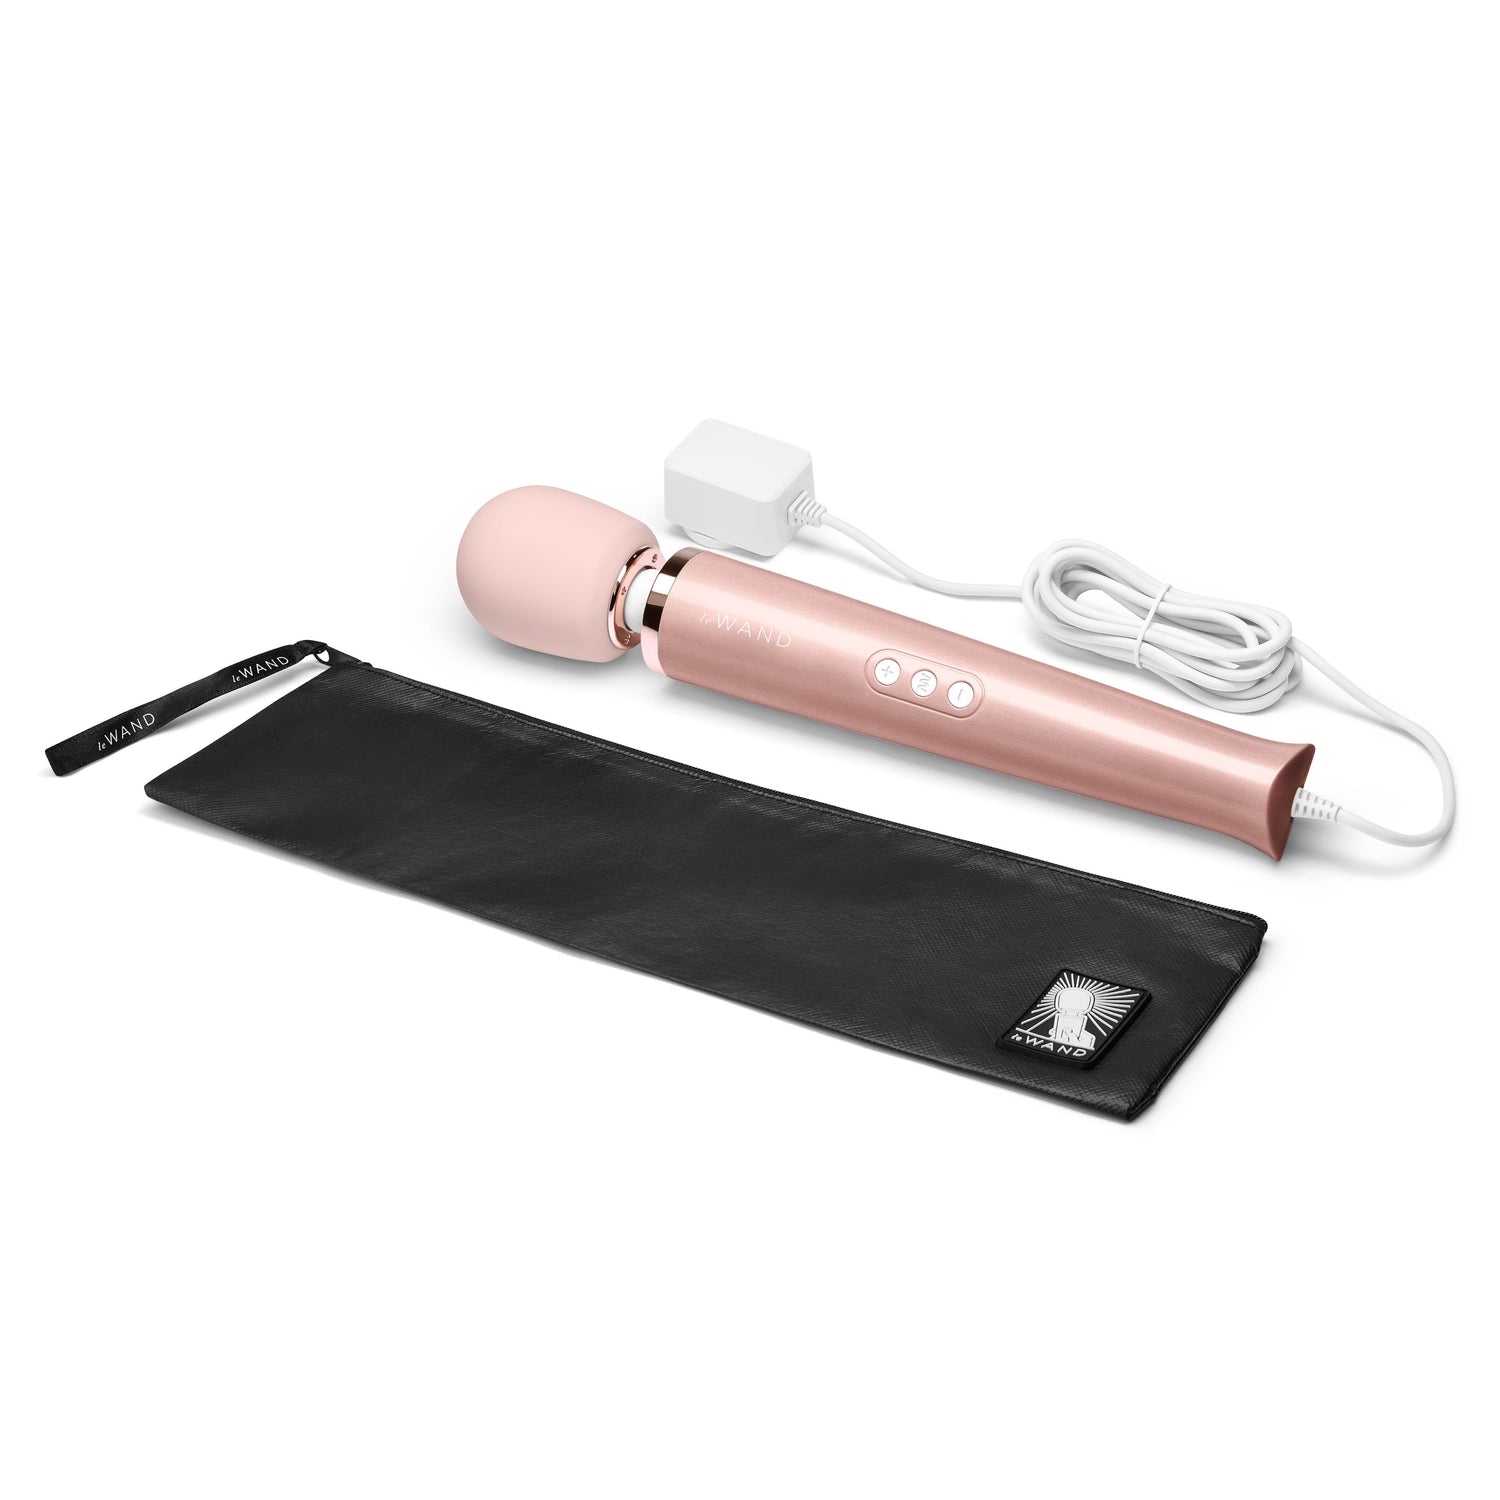 Le Wand Plug-In Massager - Rose Gold